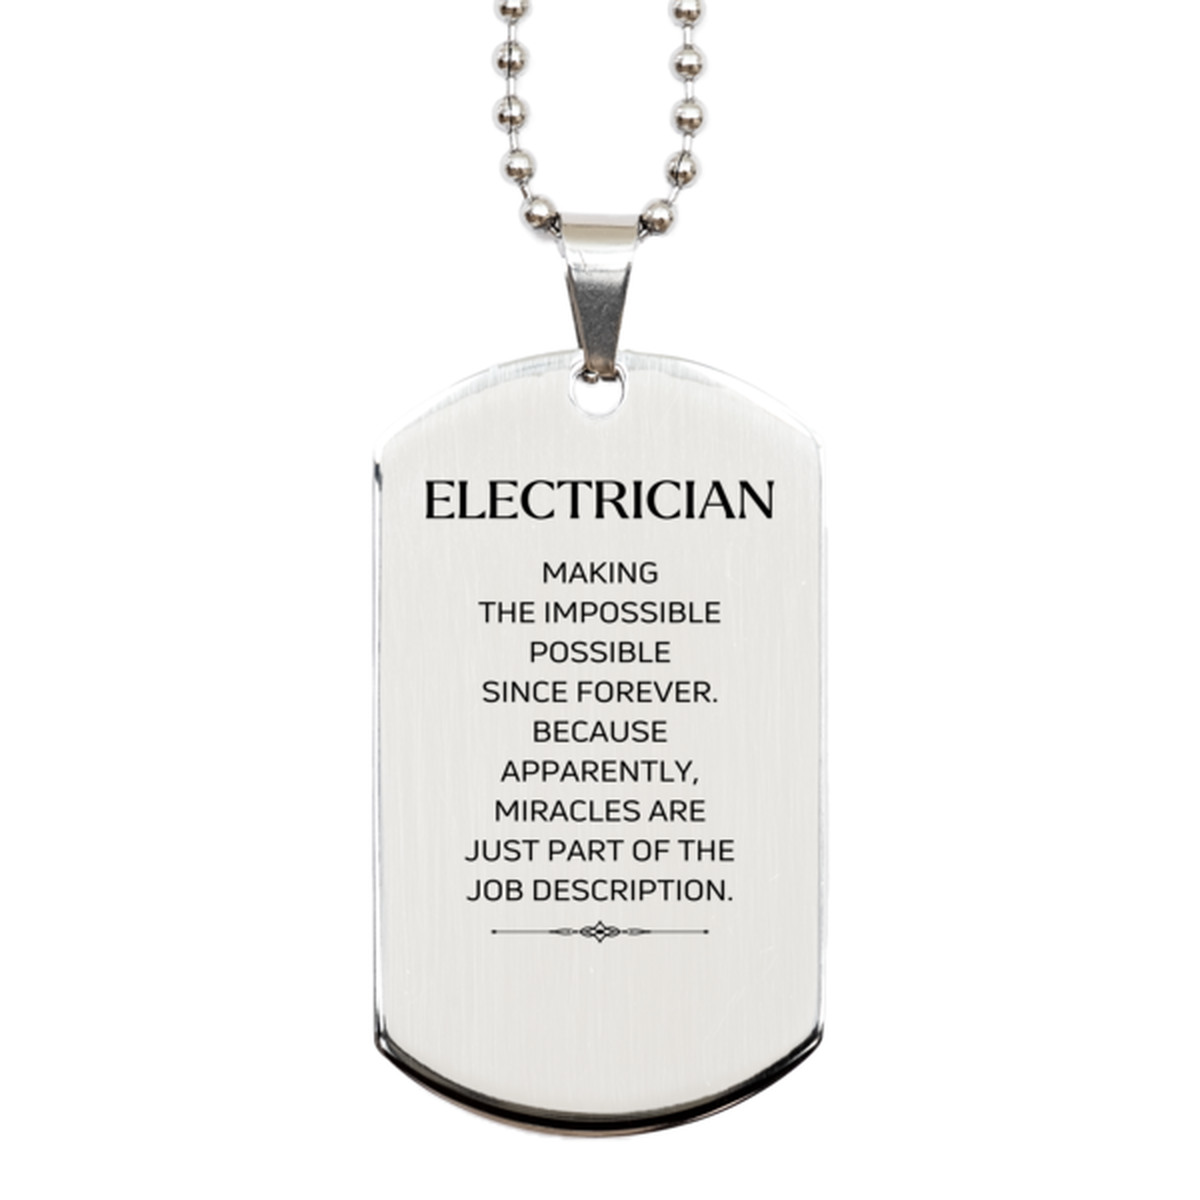 Funny Electrician Gifts, Miracles are just part of the job description, Inspirational Birthday Silver Dog Tag For Electrician, Men, Women, Coworkers, Friends, Boss